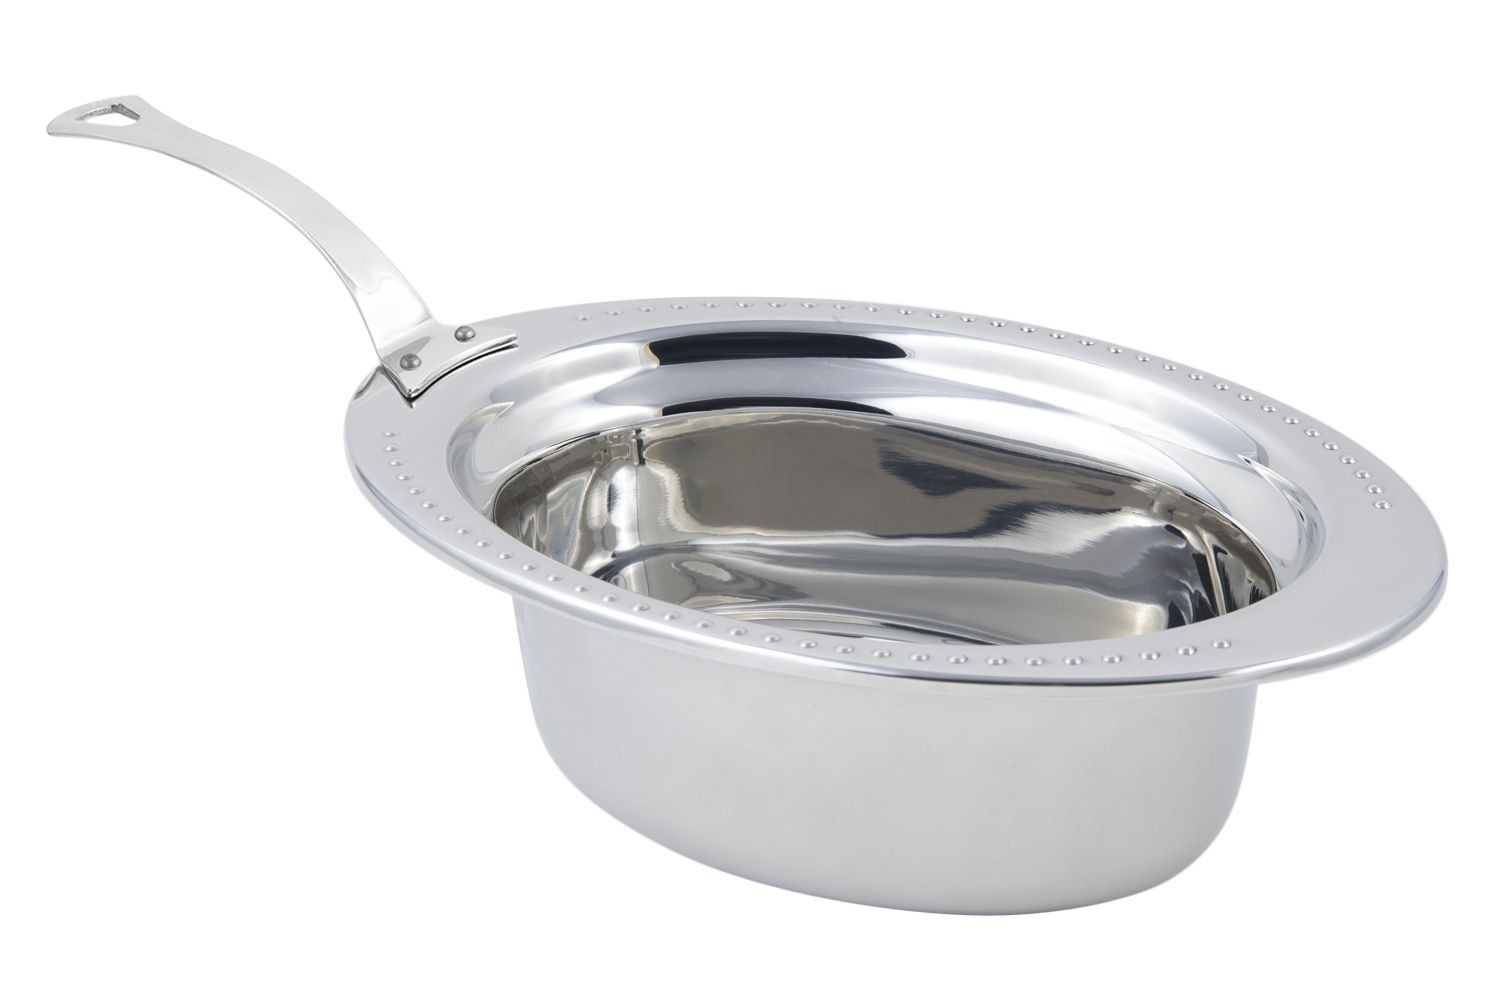 Bon Chef 5303HLSSBolero Design Oval Food Pan with Long Stainless Steel Handle, 3 3/4 Qt.